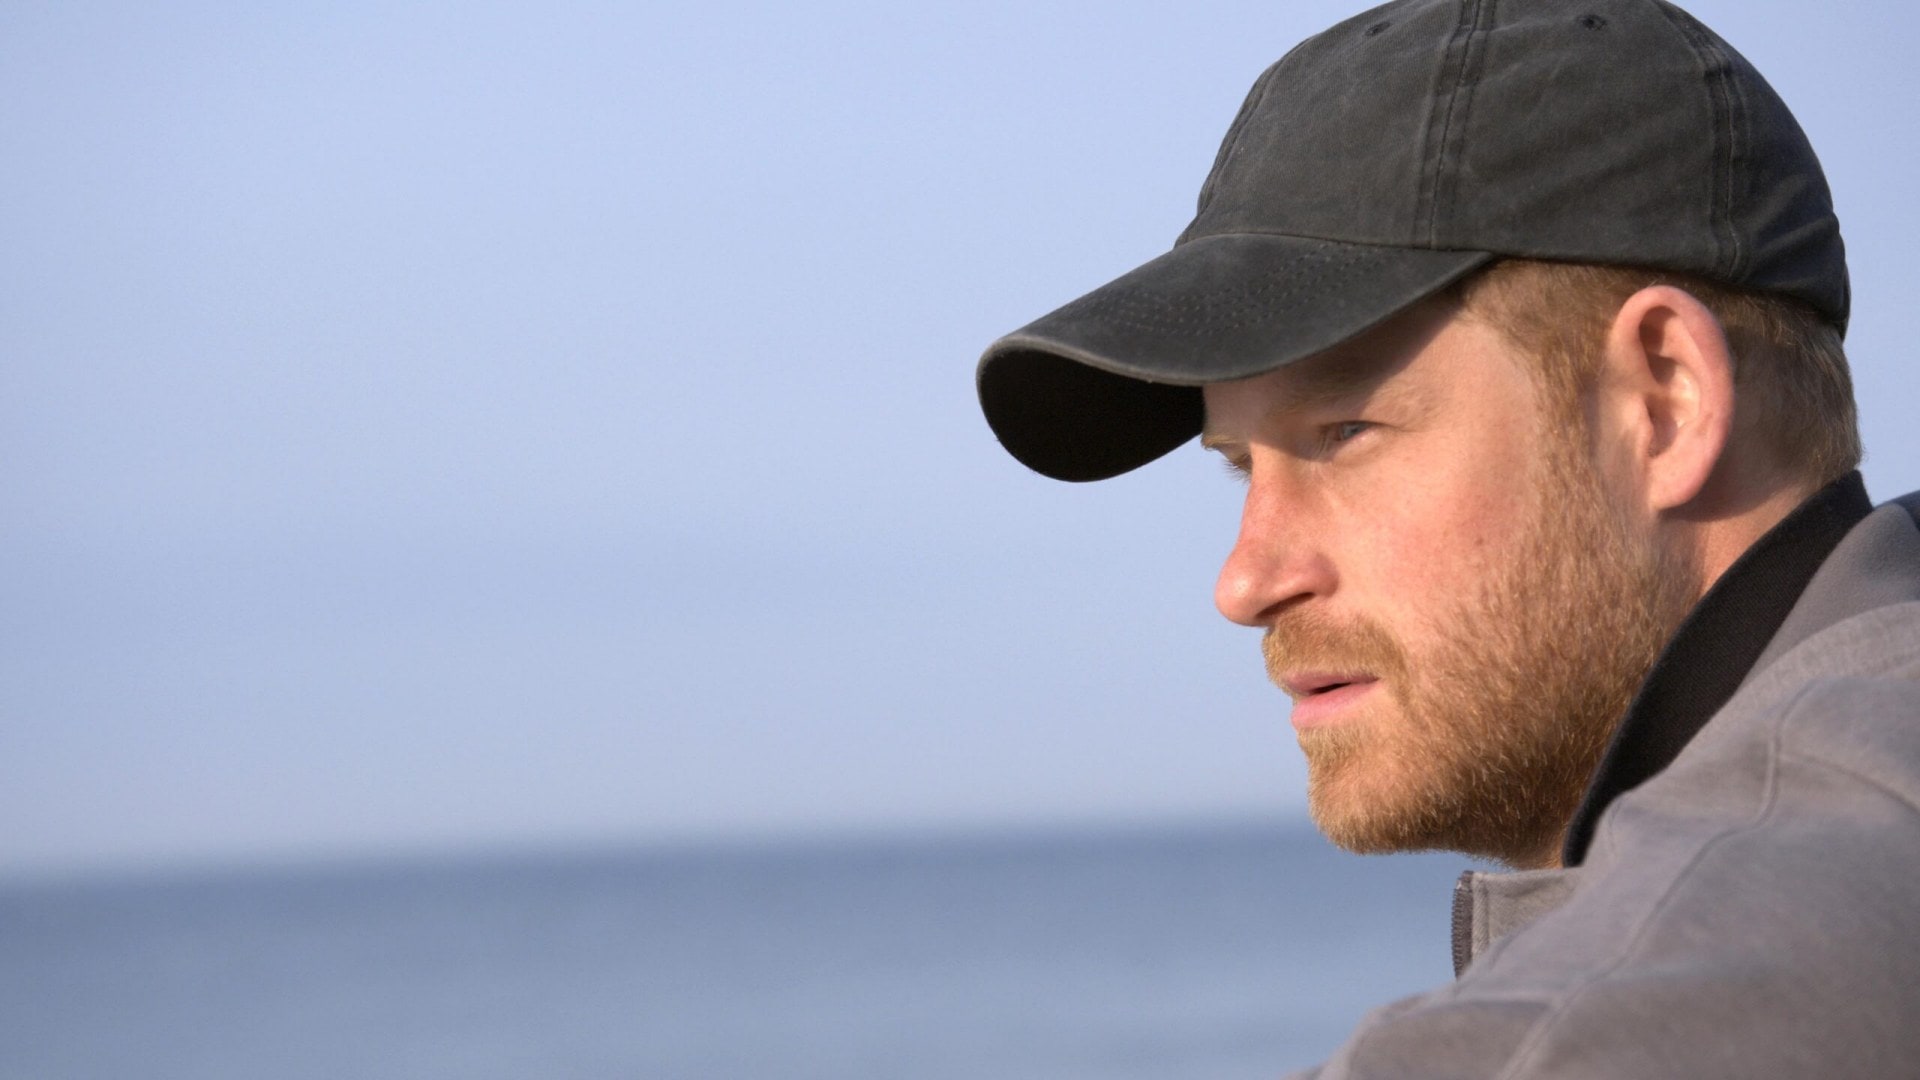 Prince Harry wearing a cap looking at the ocean in The Me You Can't See